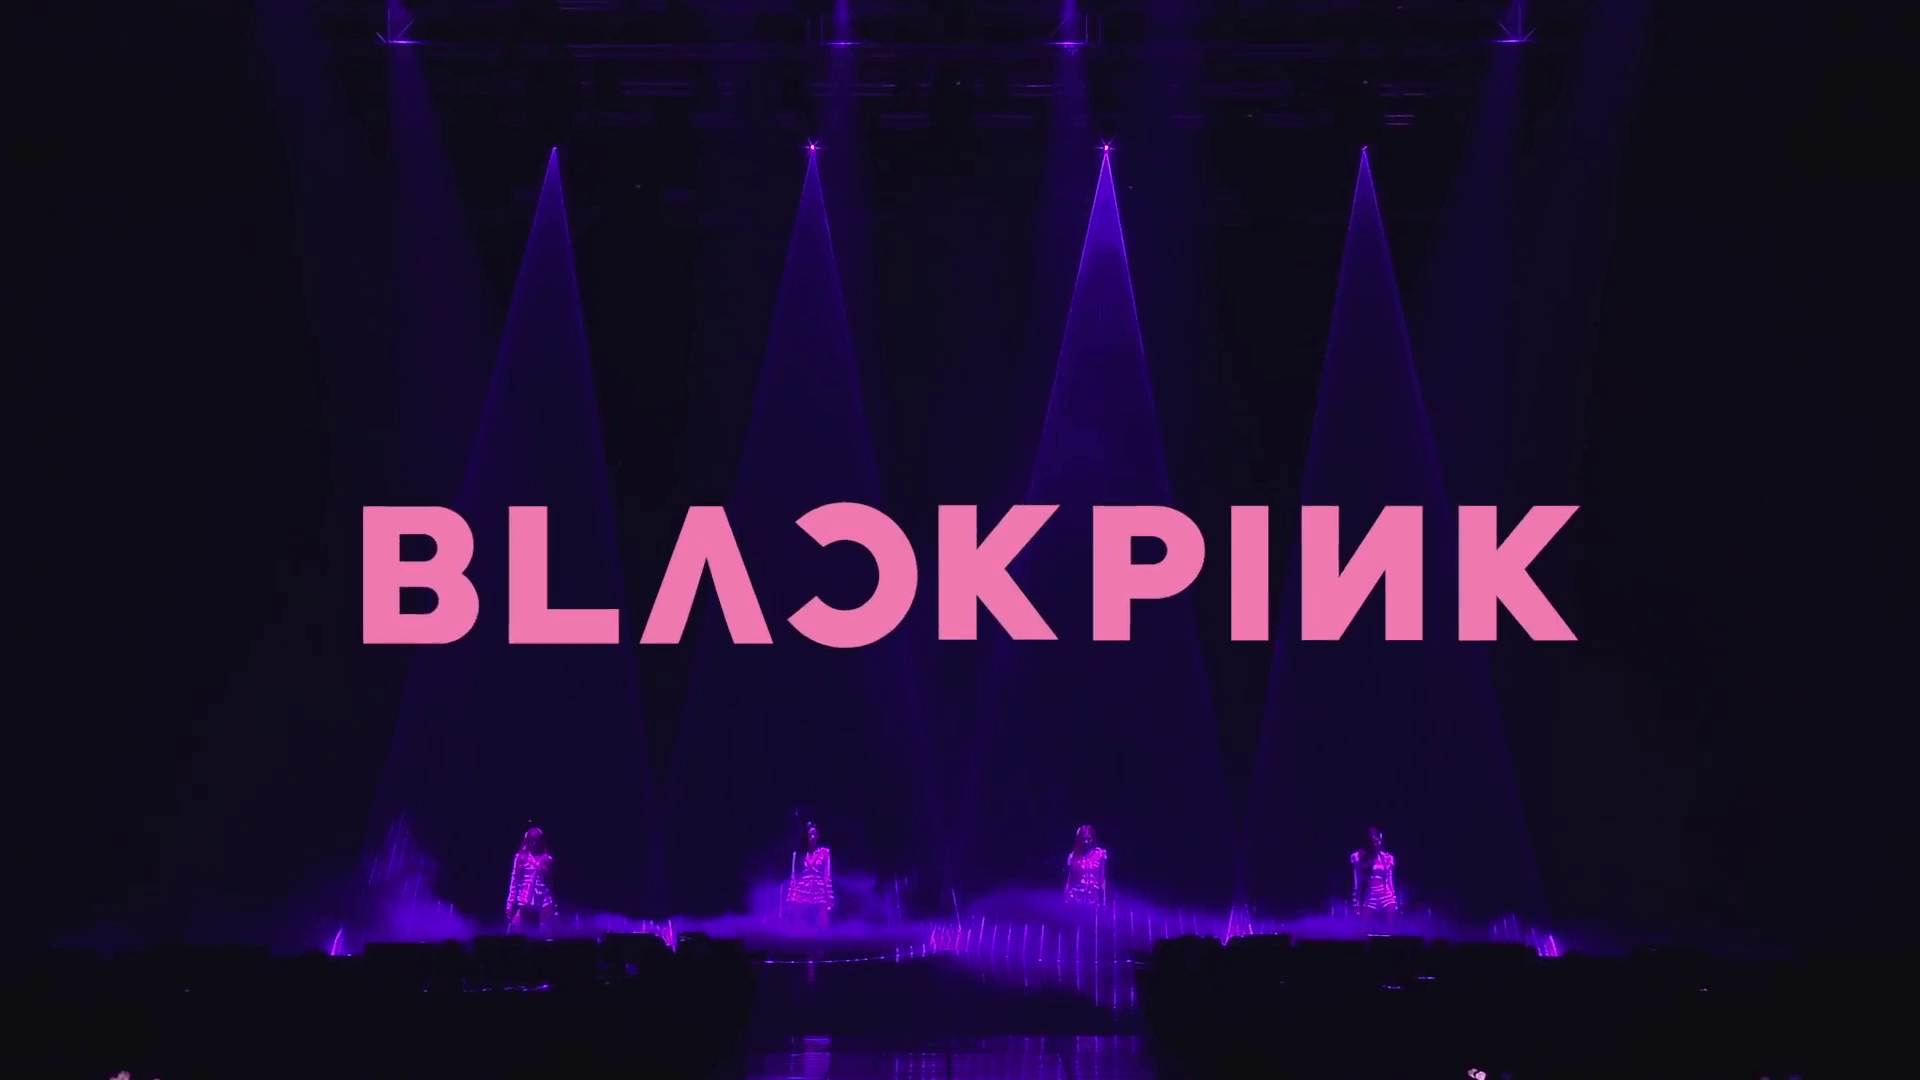 Blackpink In Your Area Wallpapers - Top Free Blackpink In Your Area